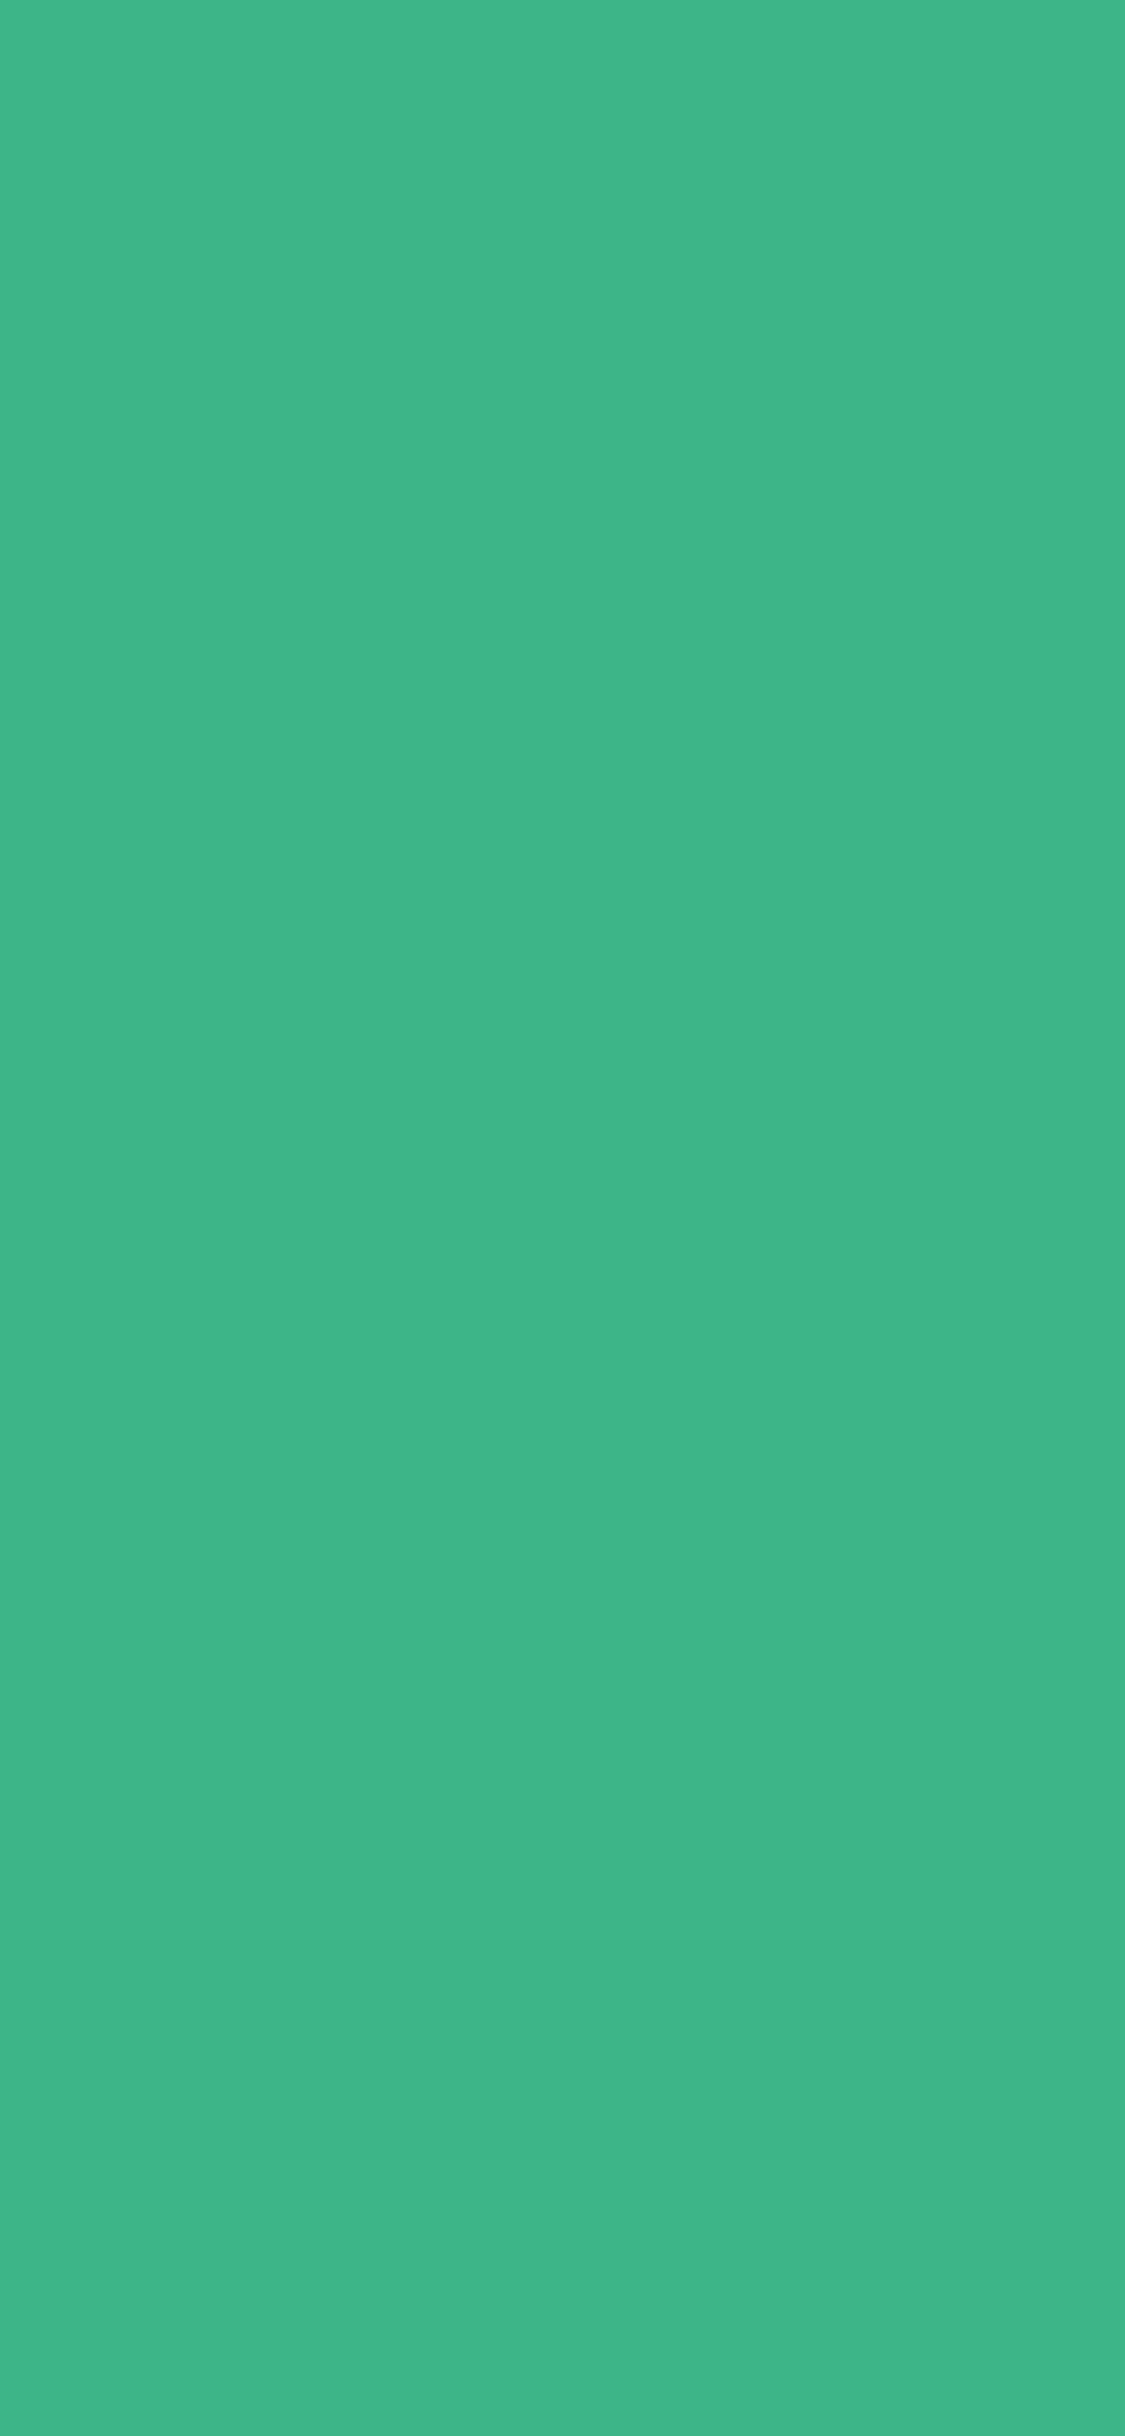 1125x2436 Mint Solid Color Background